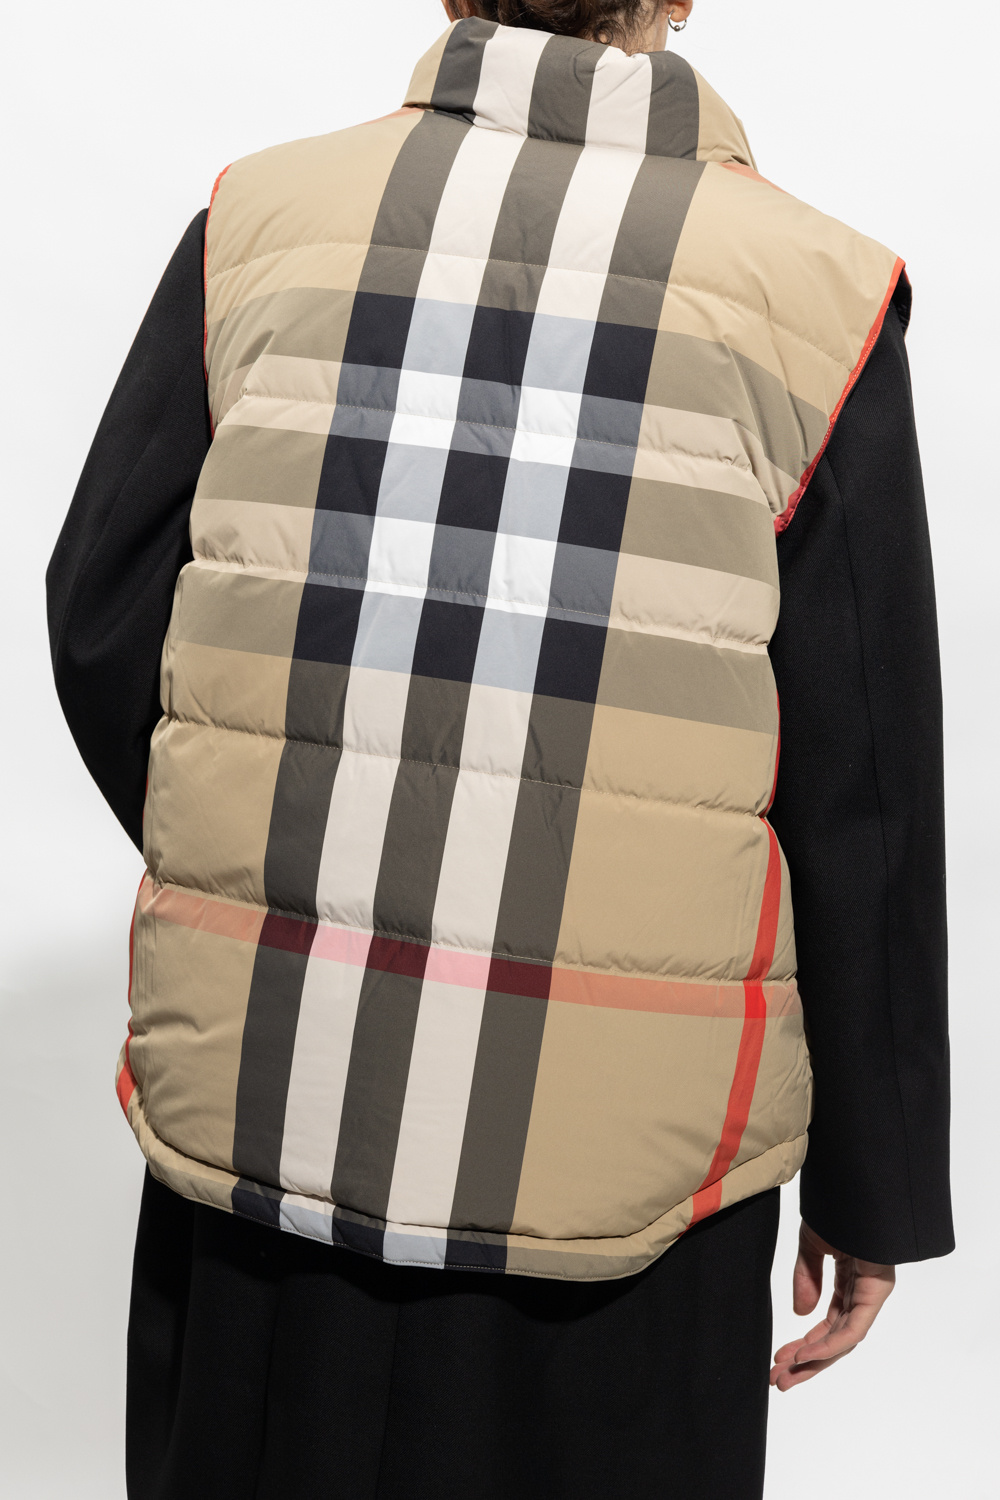 Burberry Beige Polyamide and Feathers Vest • Fashion Brands Outlet